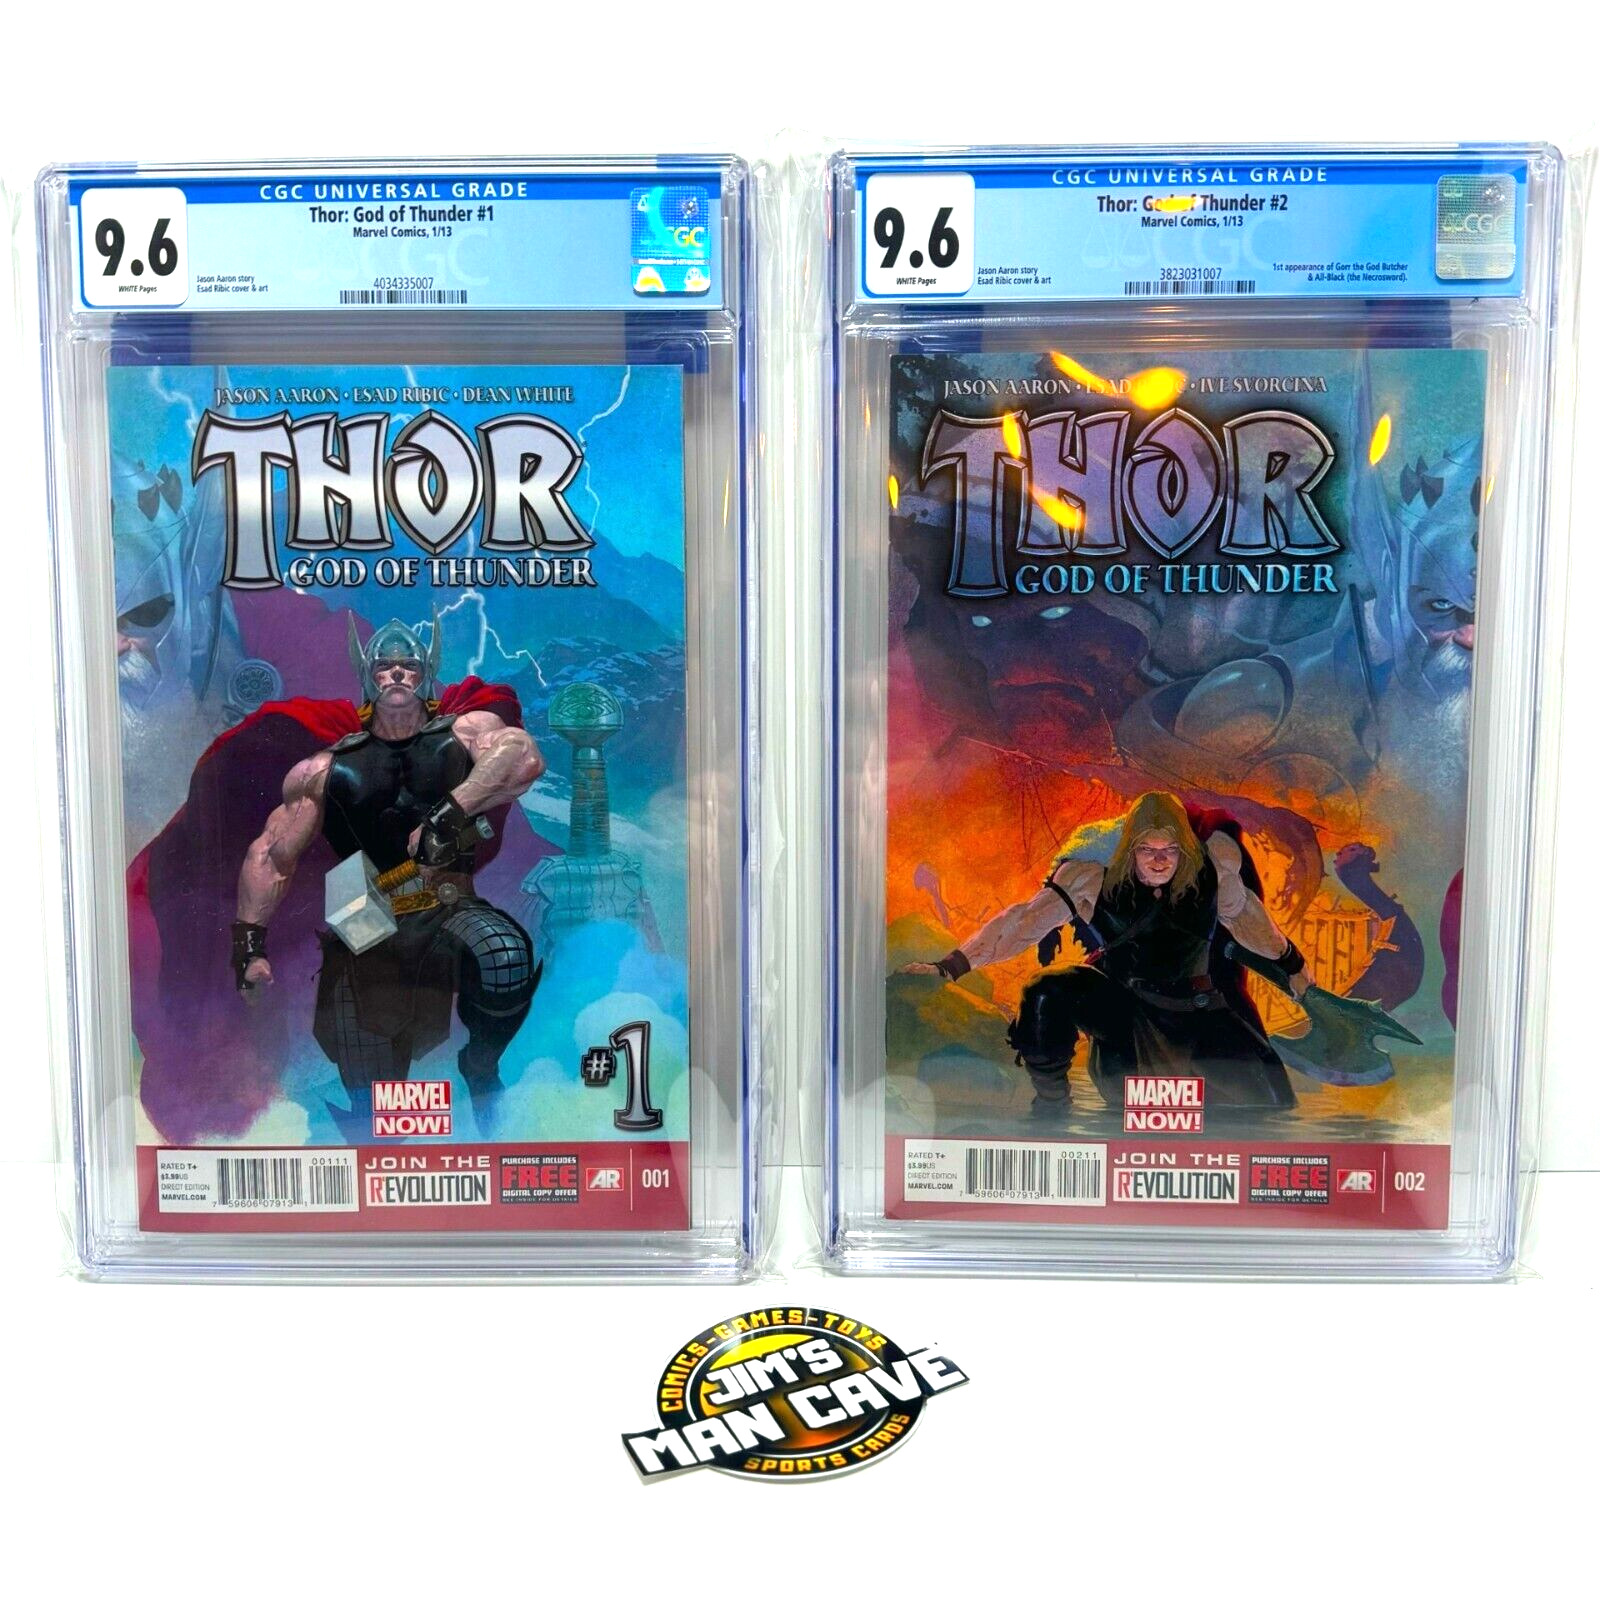 Thor: God of Thunder #1 and #2. 2013 cgc 9.6 first Gorr the God Butcher